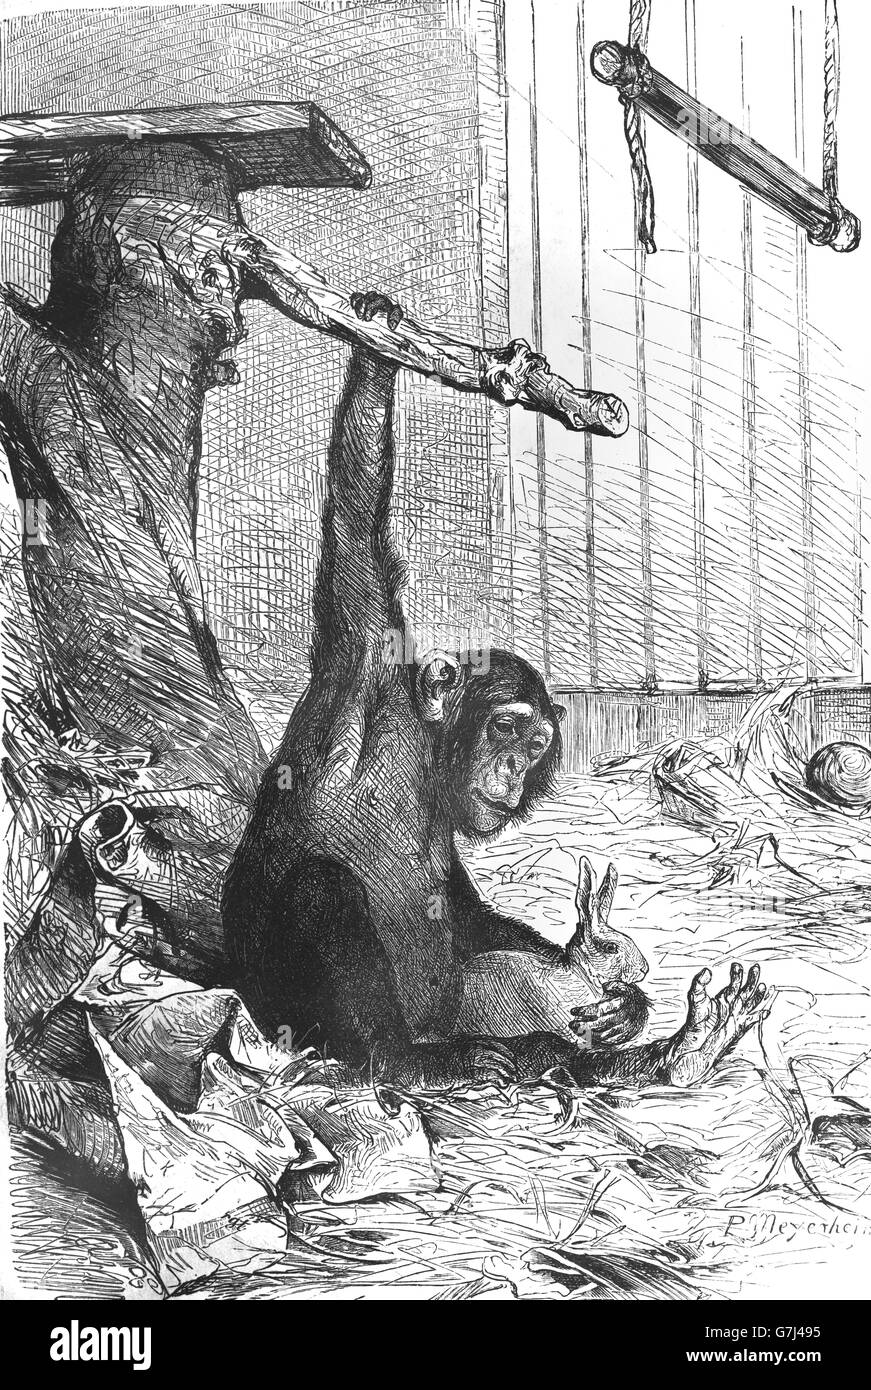 Common chimpanzee, Pan troglodytes, illustration from book dated 1904 Stock Photo